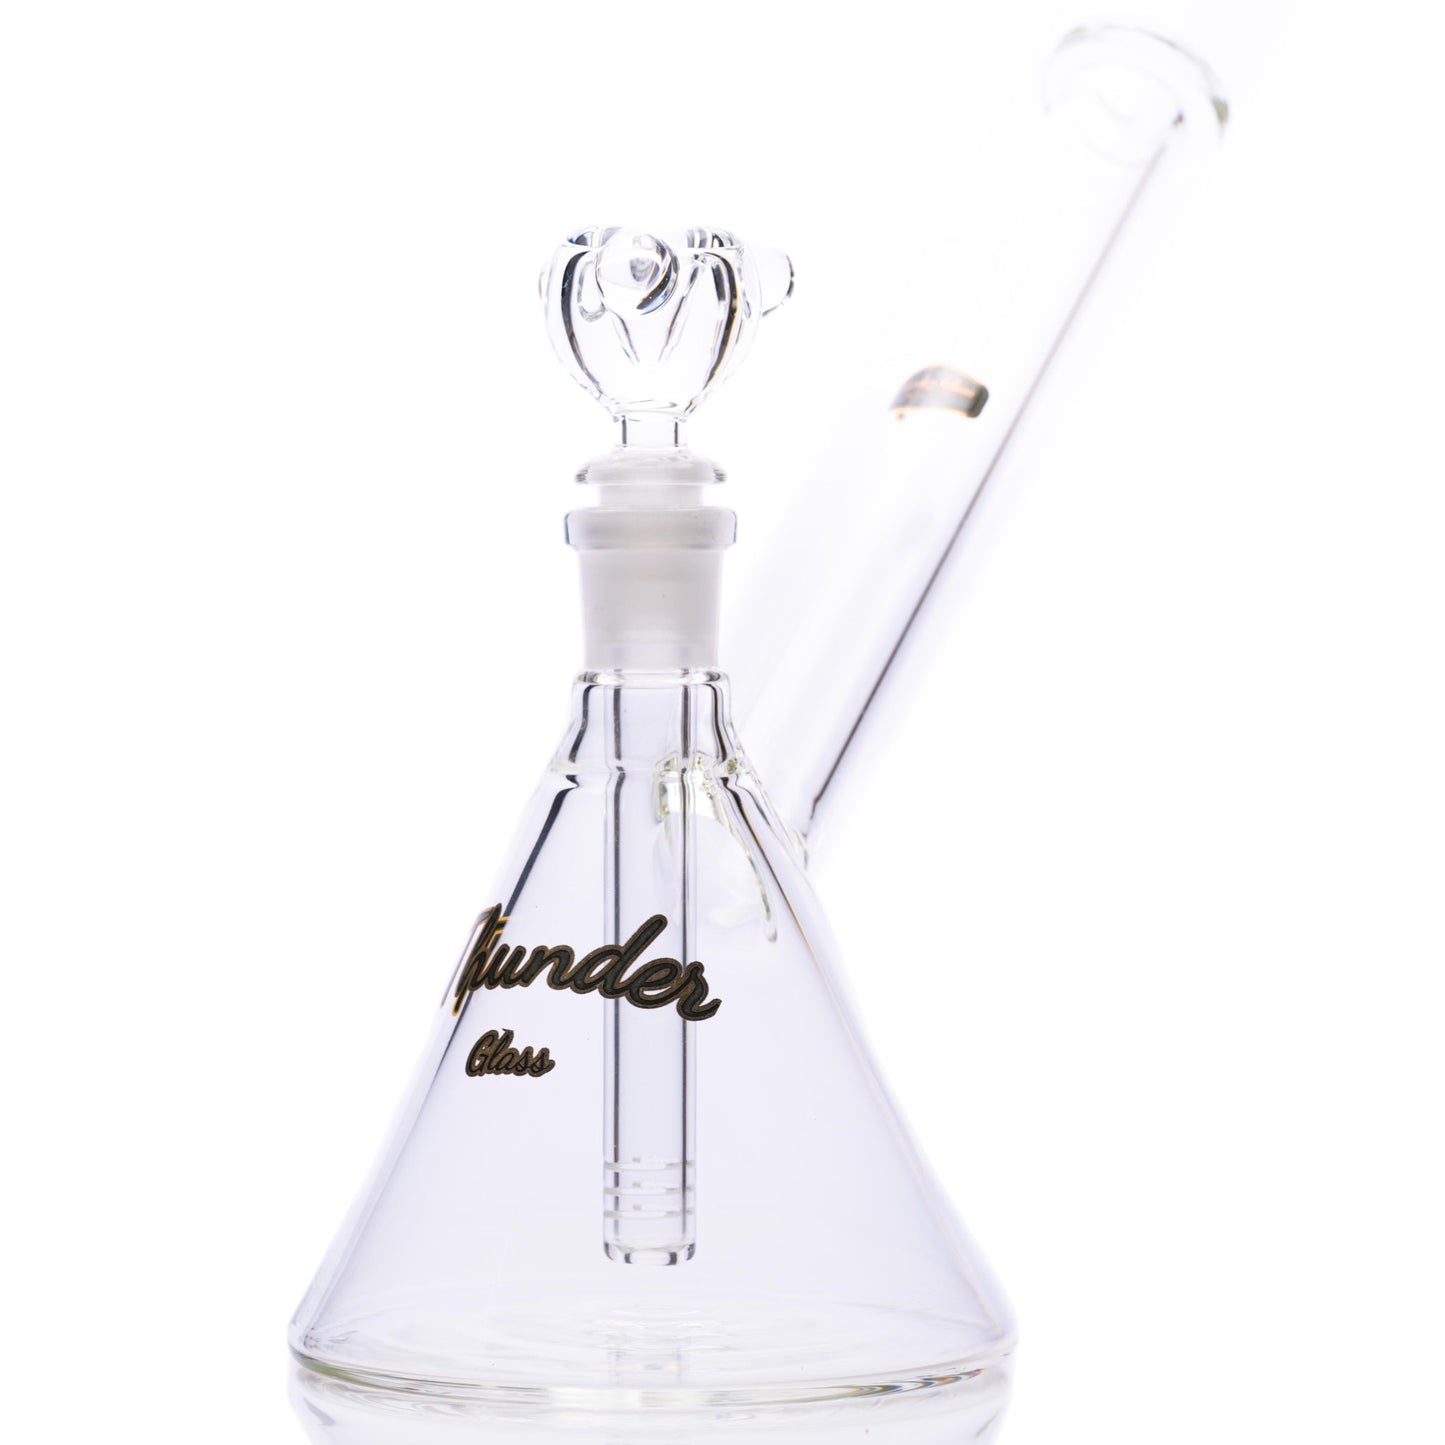 Thunder Glass 9” Pyramid Bubbler by Thunder Glass | Mission Dispensary